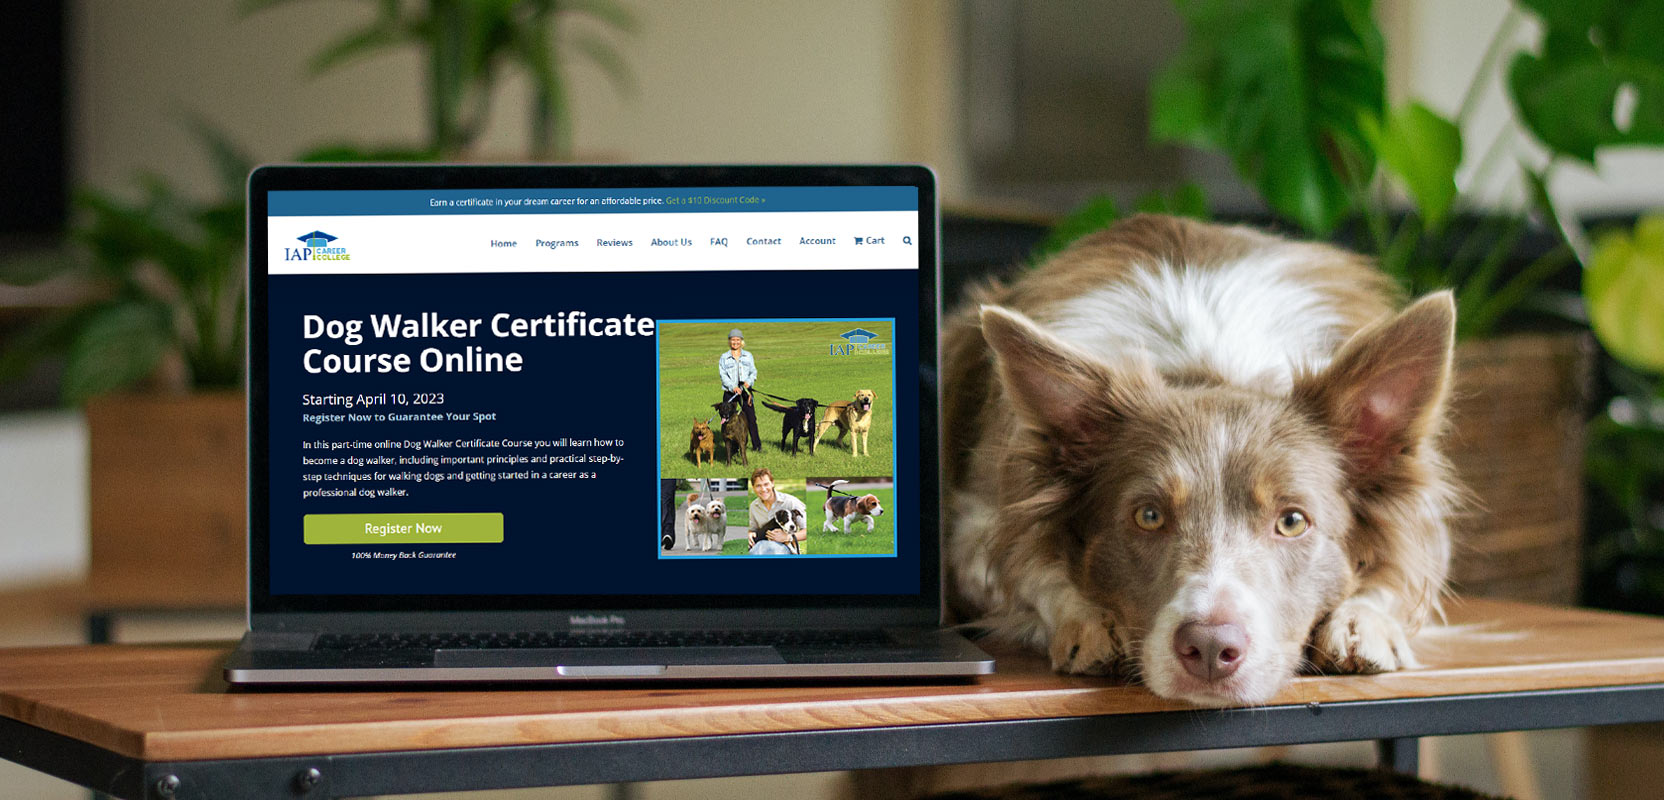 Dog sitting next to a laptop with a dog walking course on the screen